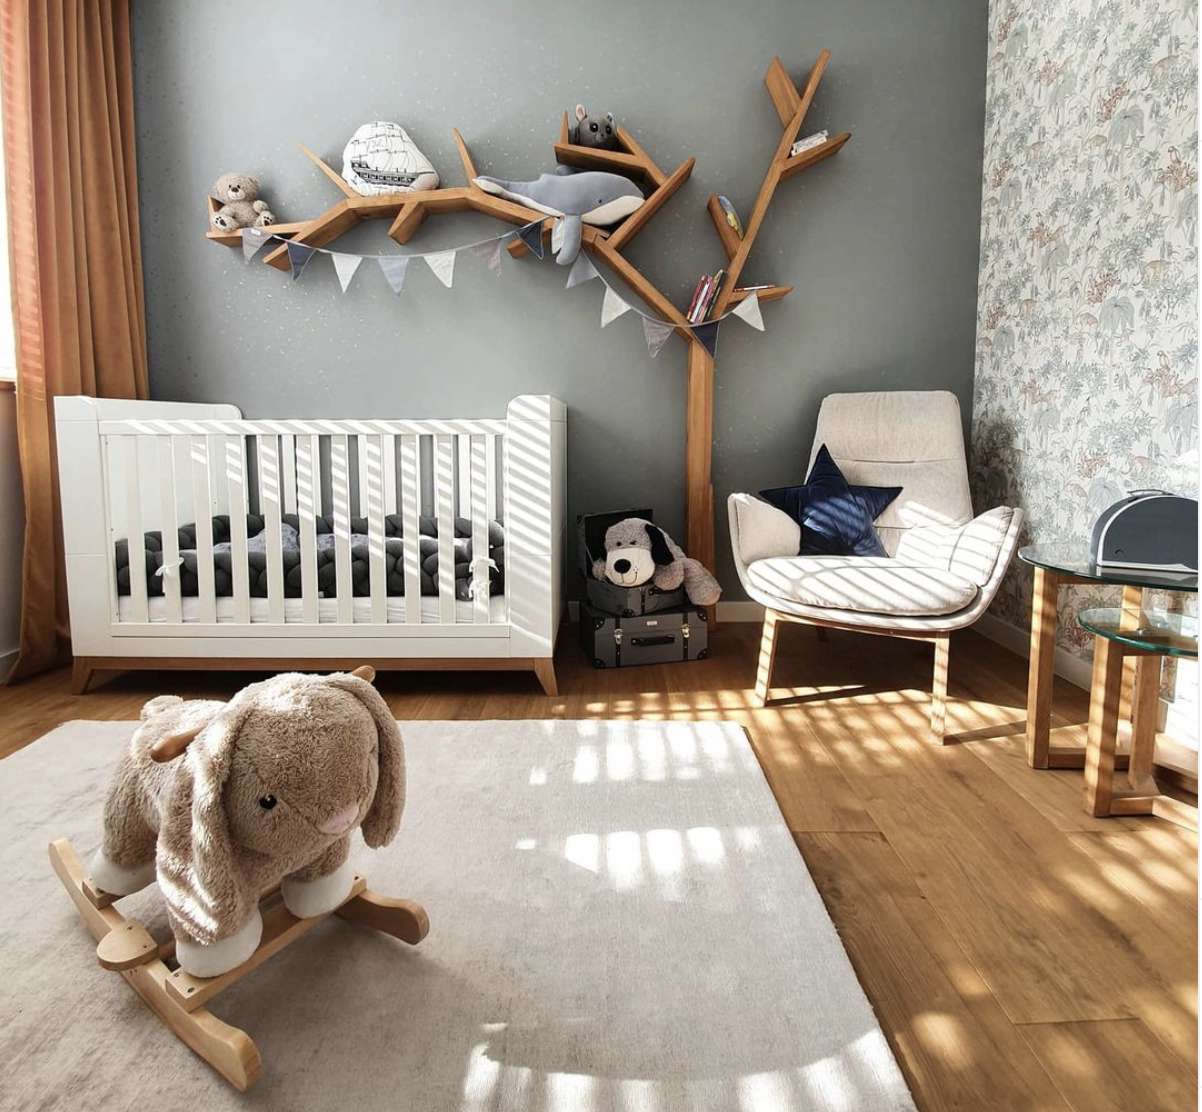 small baby room